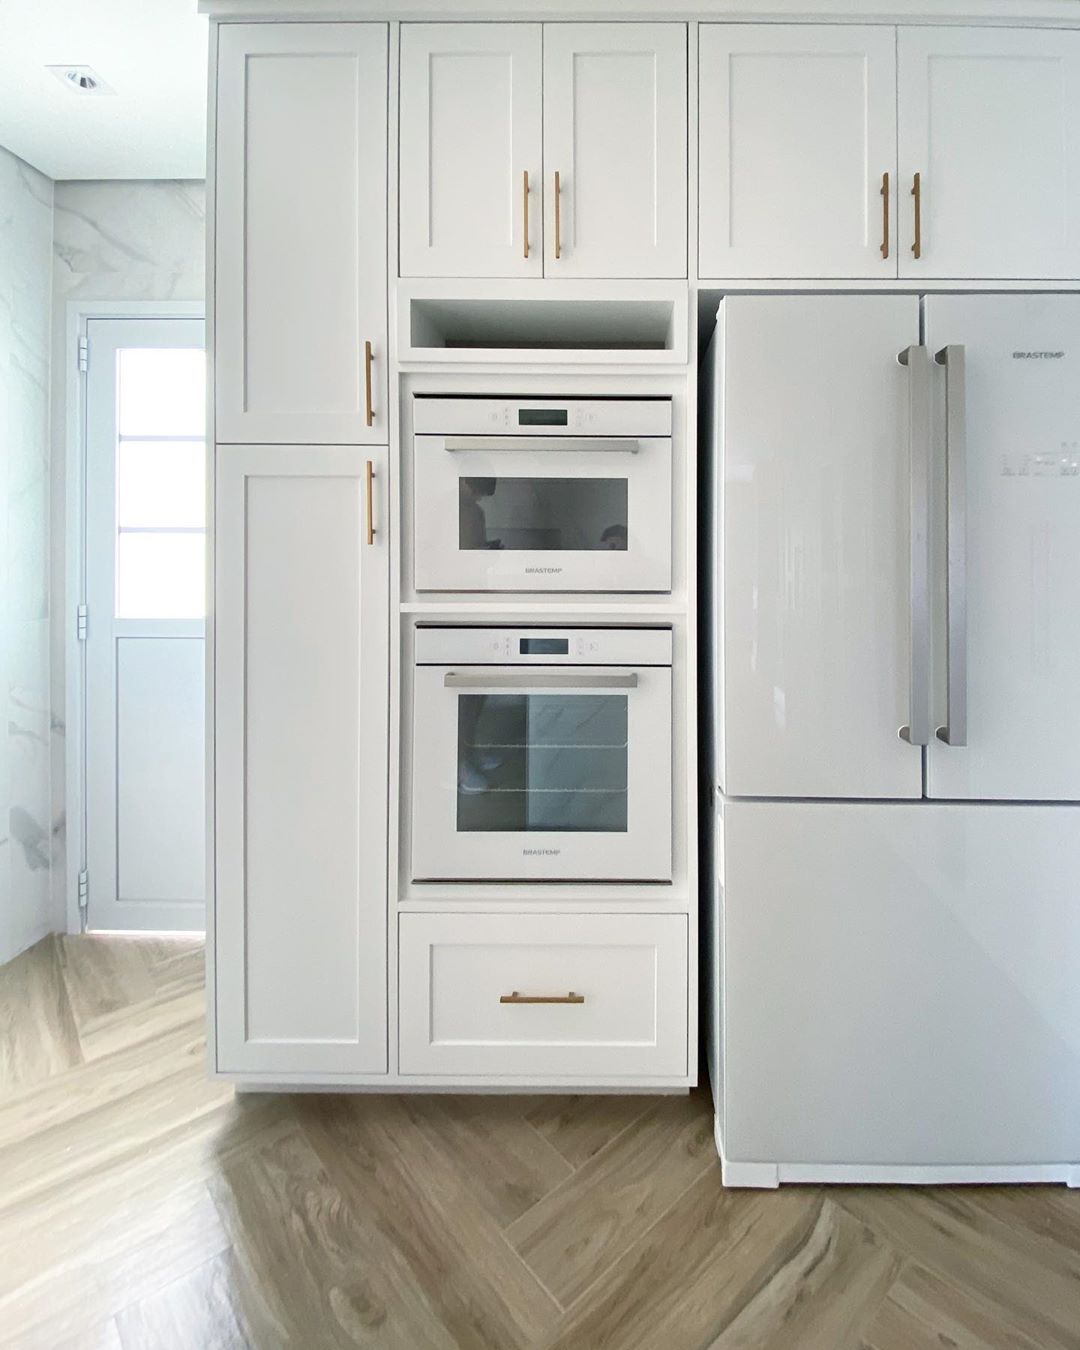 Four Things to Consider While Buying Kitchen Appliances